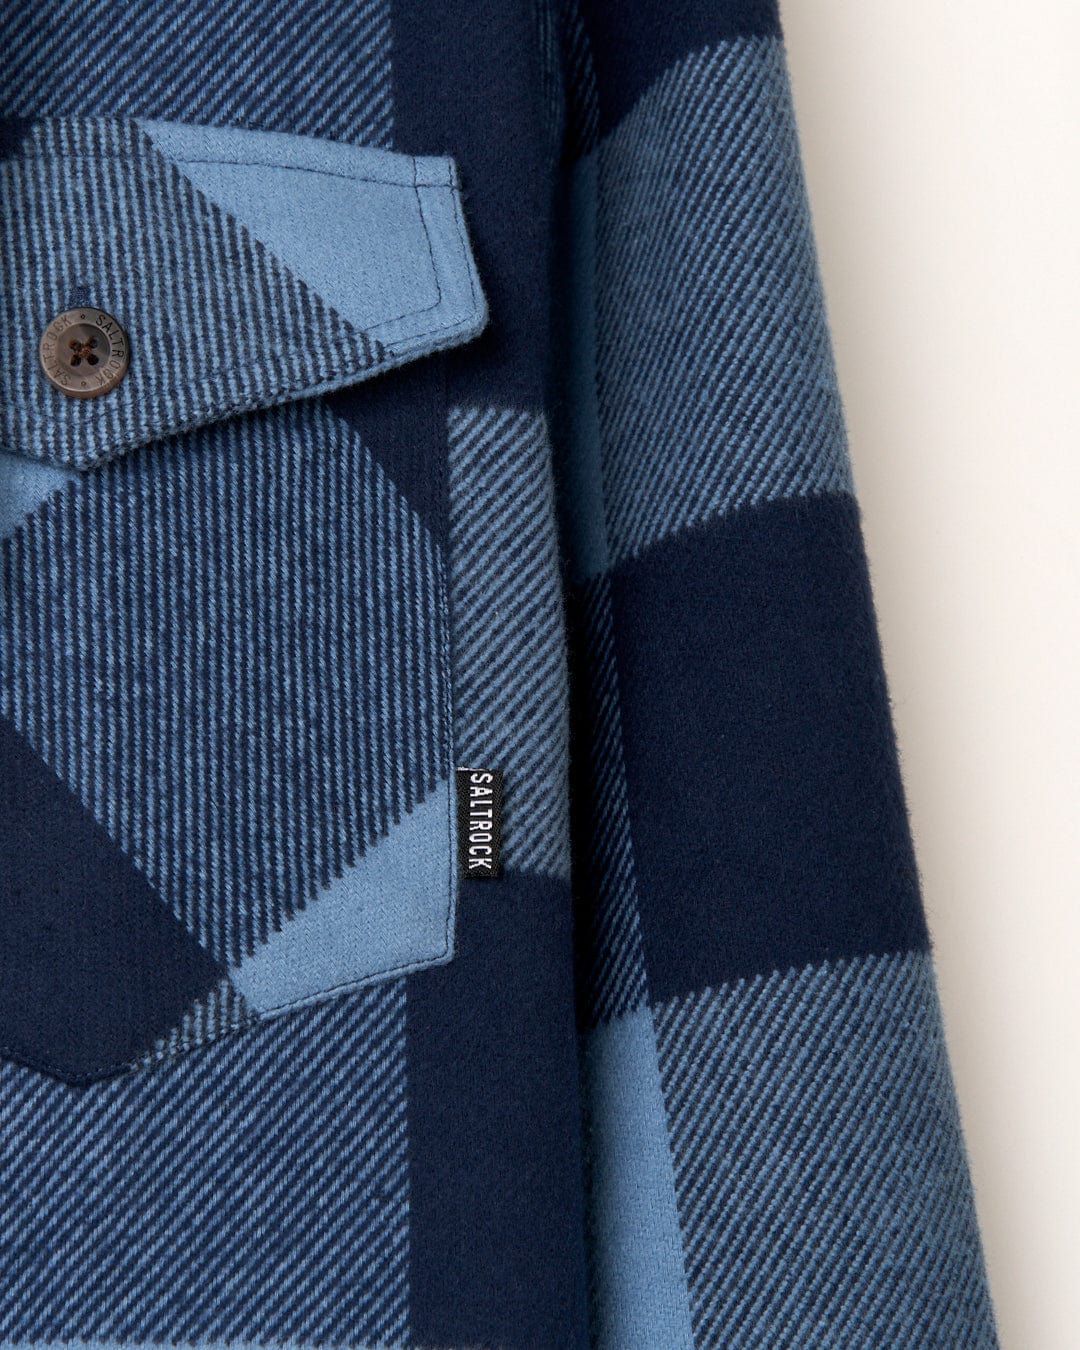 Close-up of a Saltrock Beale - Mens Hooded Long Sleeve Shirt - Blue with a visible brand label.